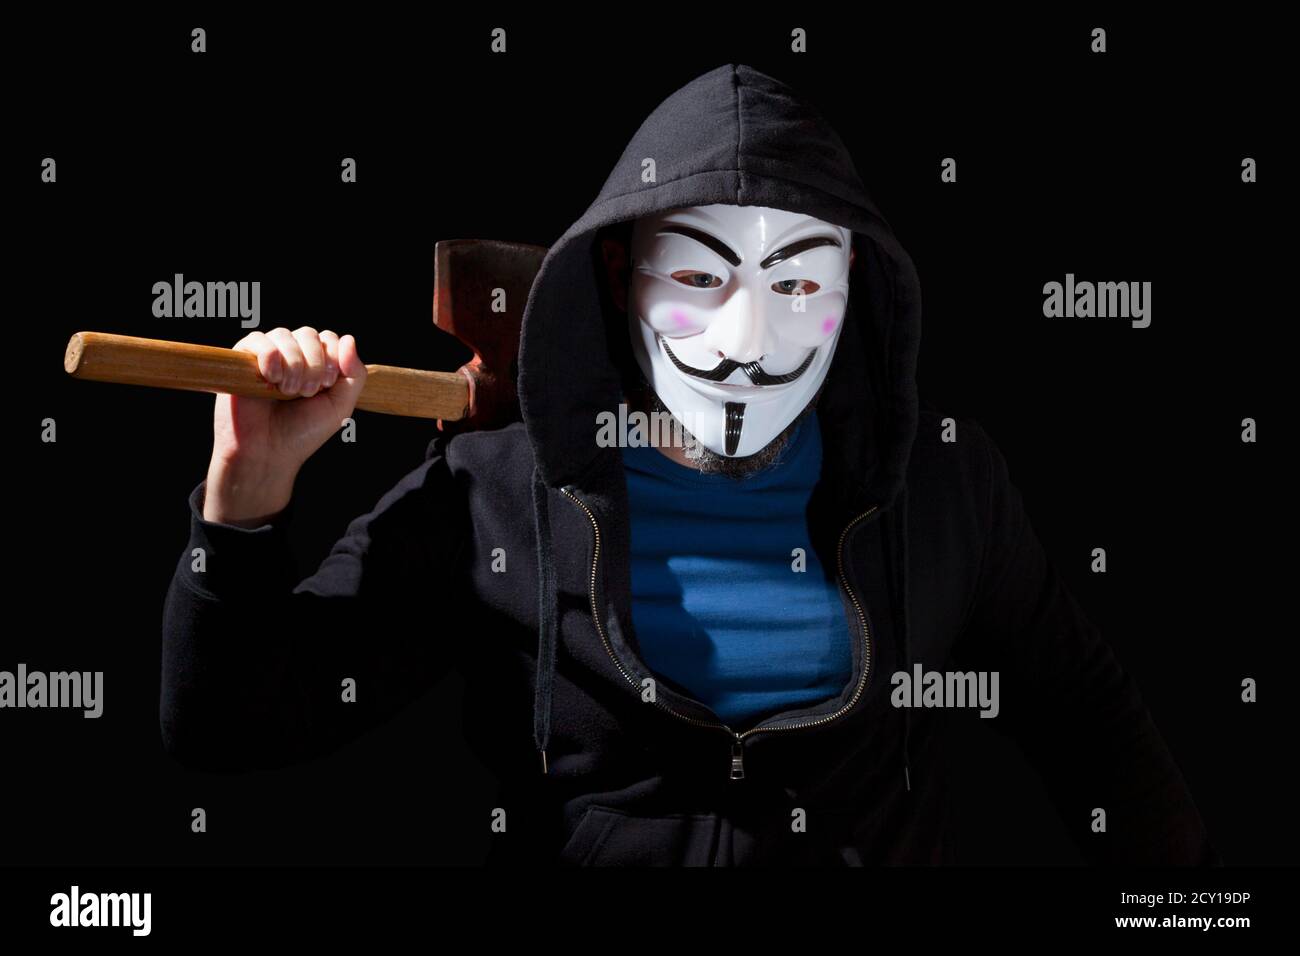 Man armed with an axe and wearing a mask and a hoodie on black background. Stock Photo